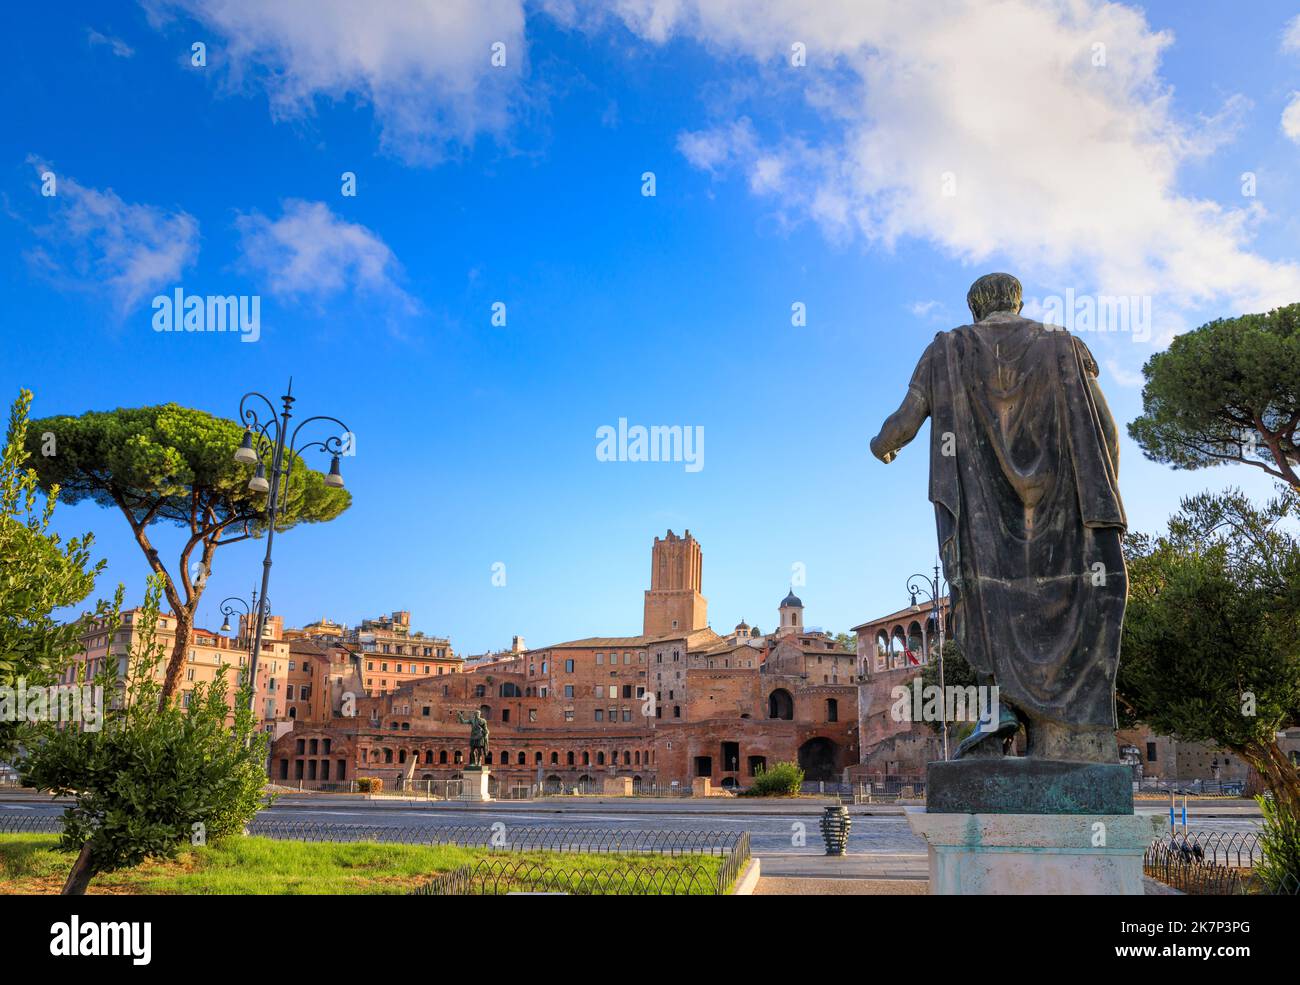 Urban view of Rome: Imperial Forum of Trajan seen from Via dei Fori Imperiali, Italy. Stock Photo